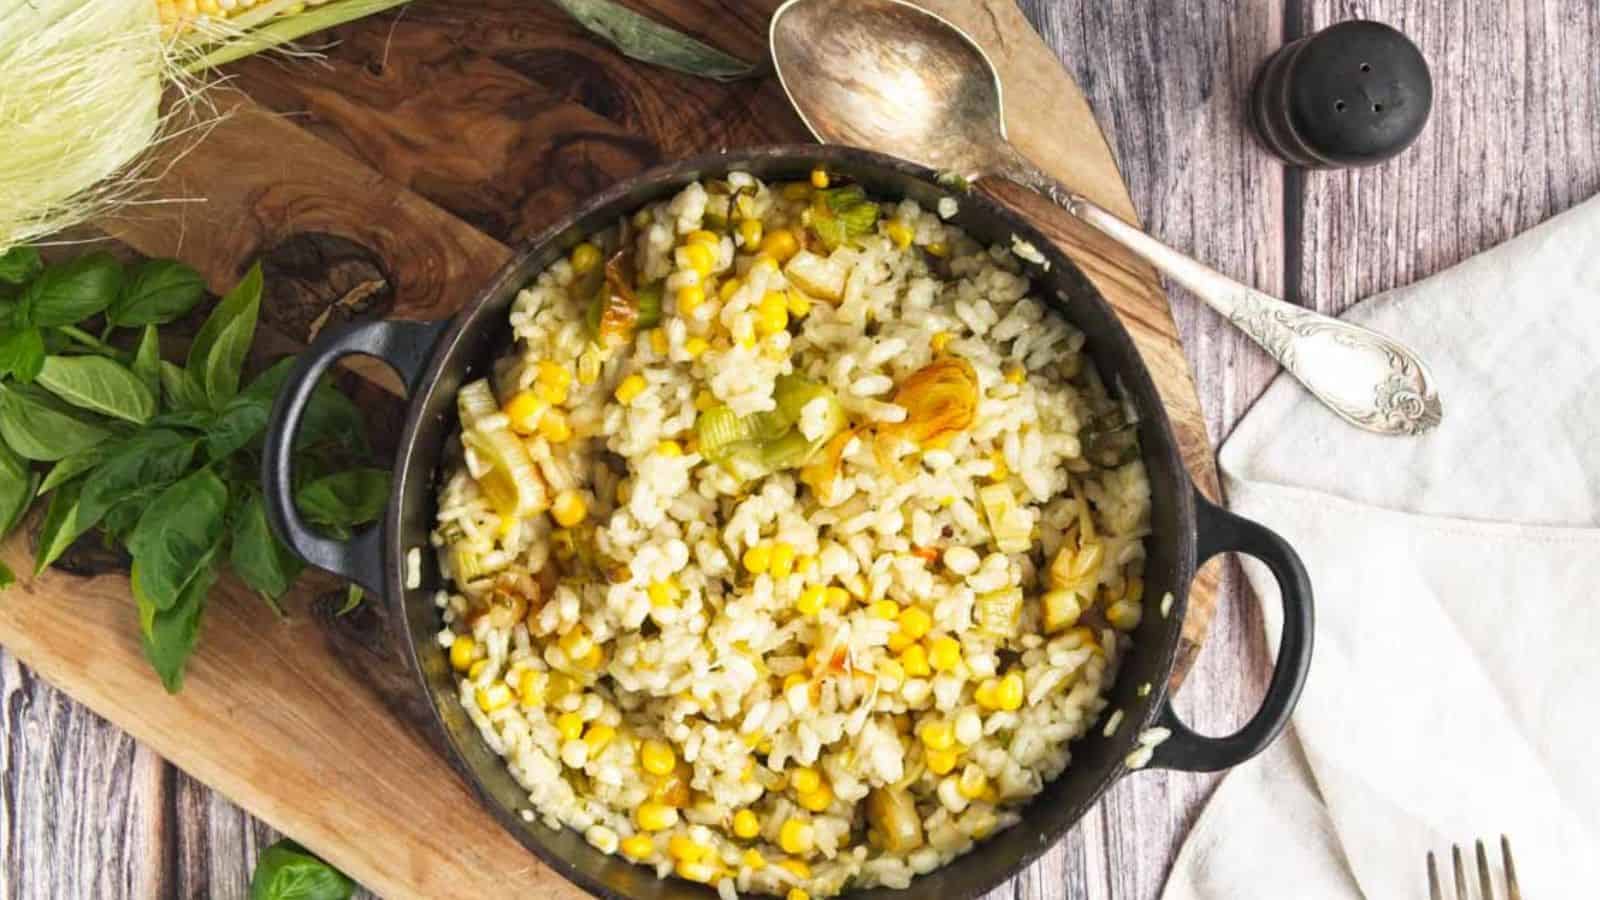 <p>Enjoy the sweetness of corn with our Sweet Corn and Leek Risotto, a dish that provides comfort on every spoonful. It's a creamy risotto that blends sweet and savory beautifully. Perfect for those who love a hearty meal that warms the soul. Don't miss adding this to your risotto experiences.<br><strong>Get the Recipe: </strong><a href="https://twocityvegans.com/sweet-corn-leek-risotto/?utm_source=msn&utm_medium=page&utm_campaign=">Sweet Corn and Leek Risotto</a></p>